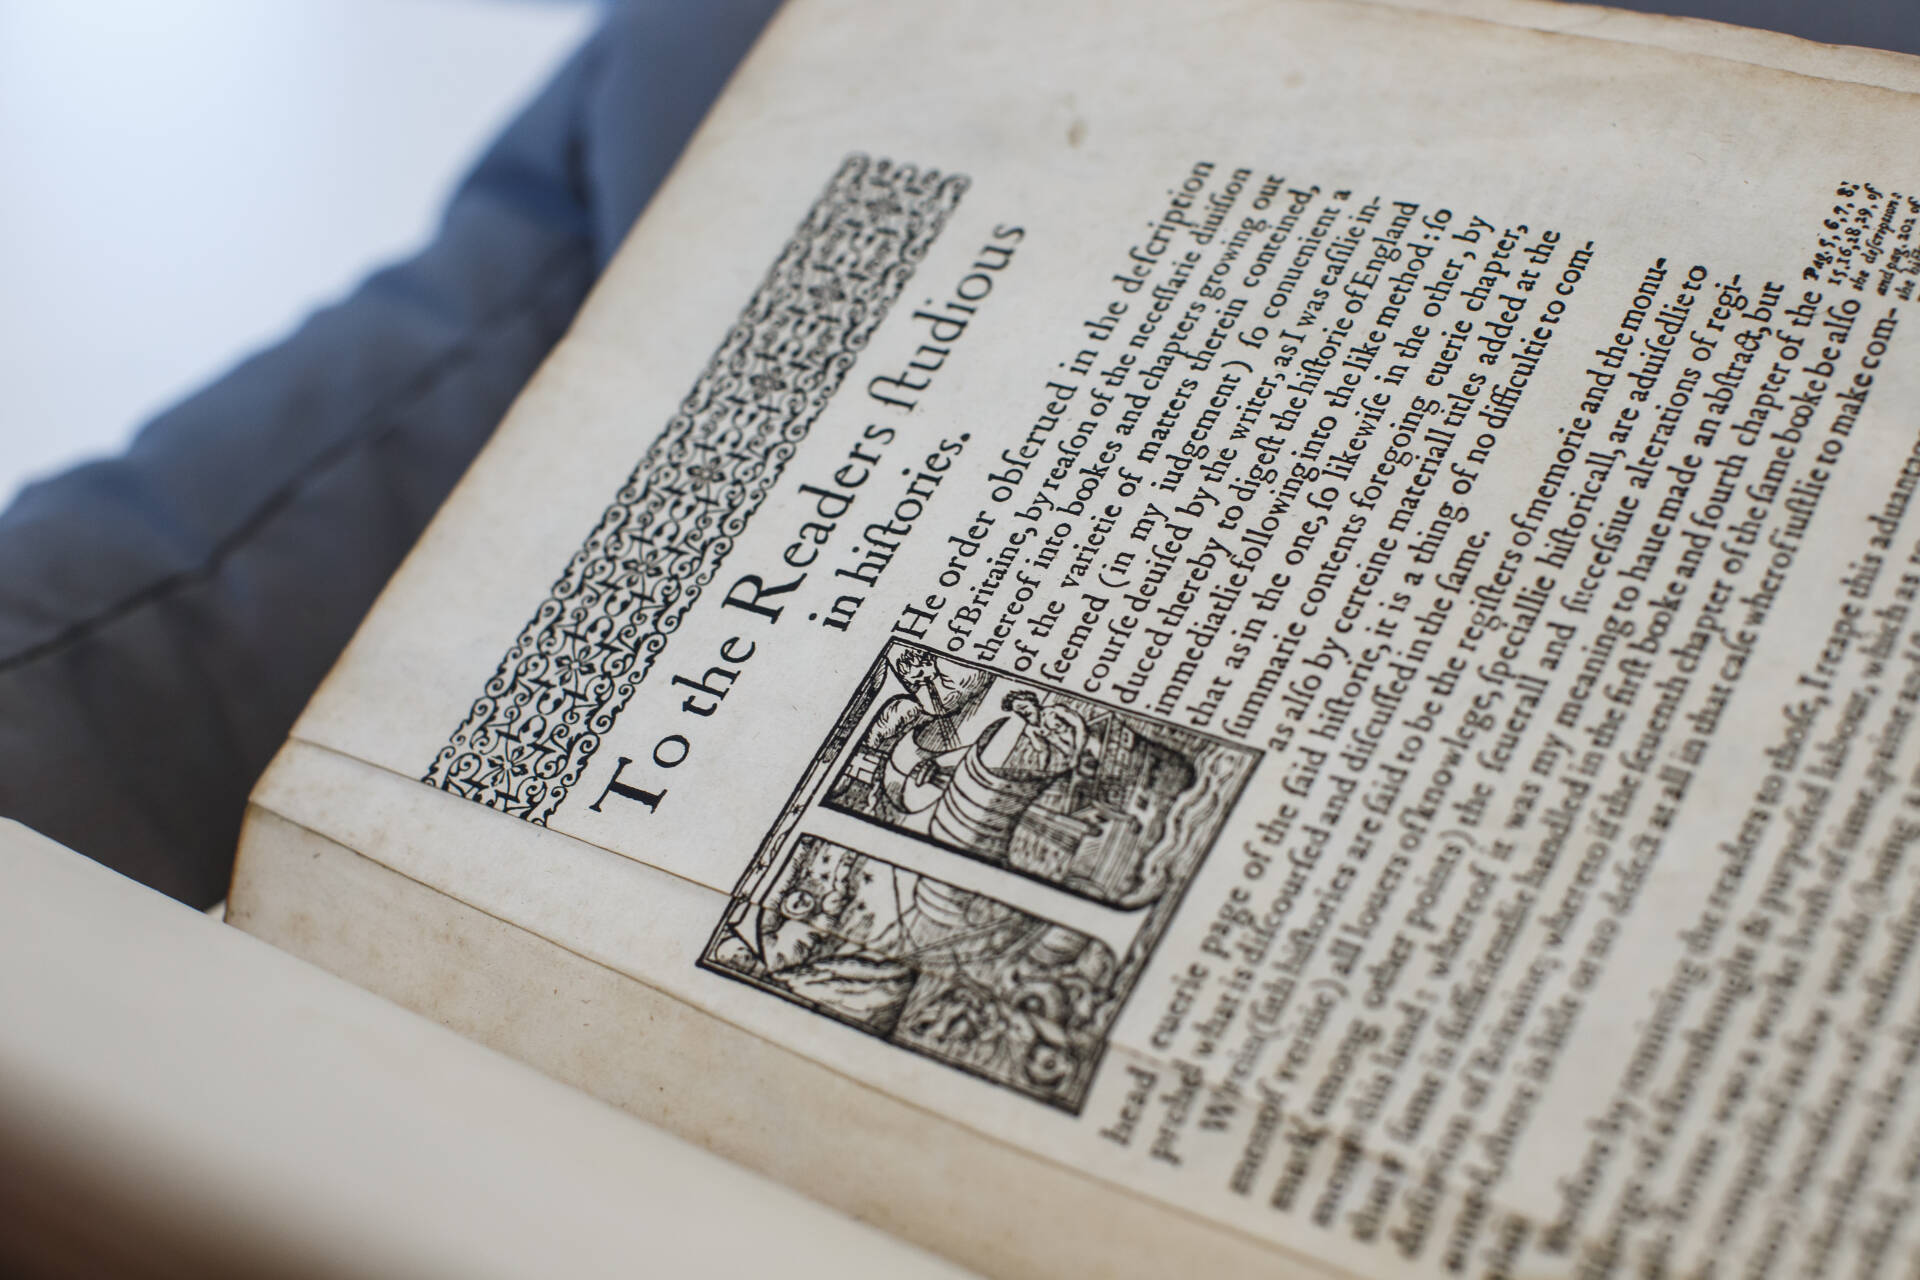 An image of the text Holinshed's Chronicles, published 1587. From our pre-1700 collection.